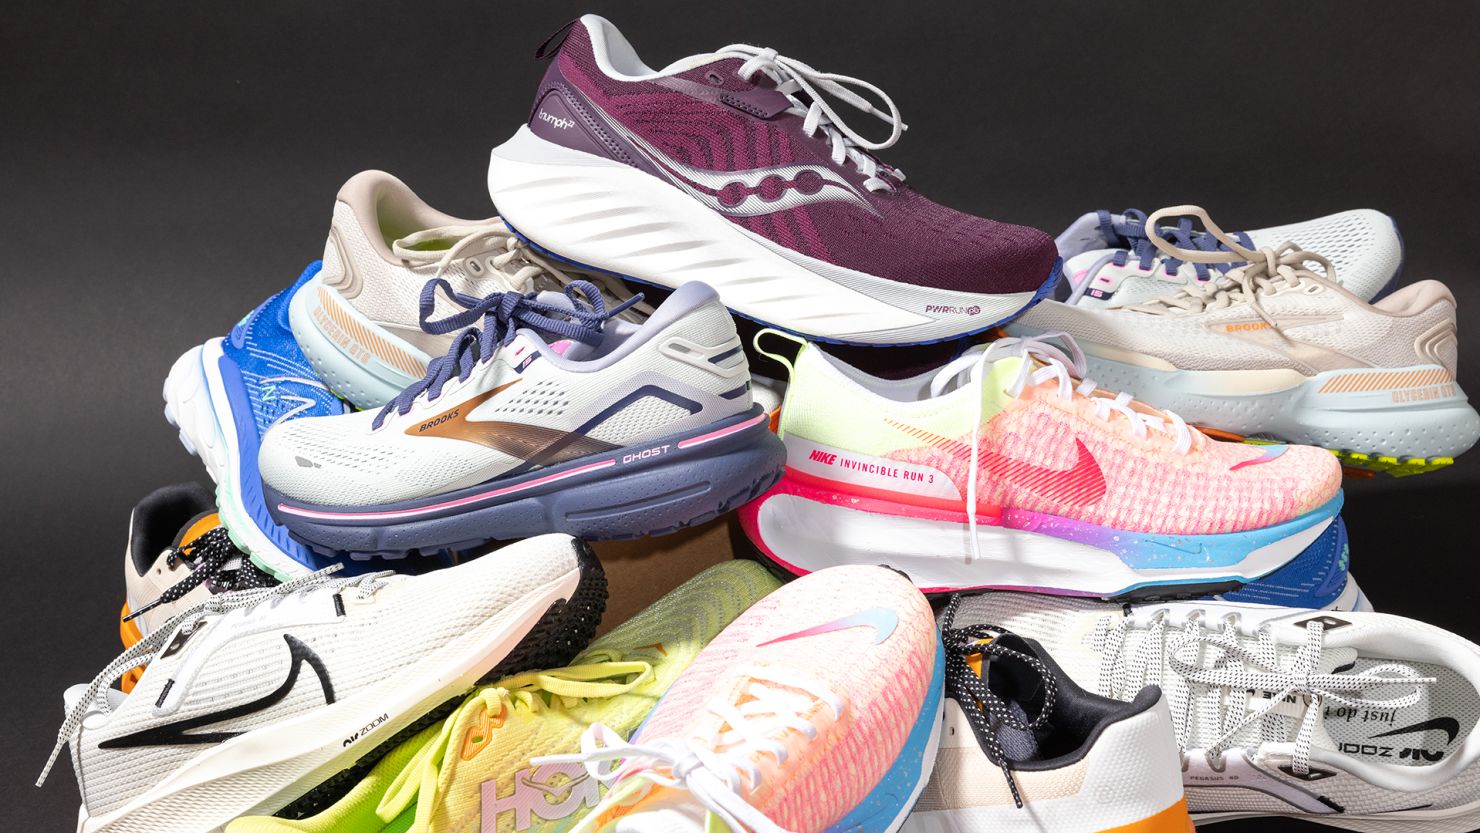 How to Choose the Correct Athletic Shoes for Your Feet & Activity - PT Pro